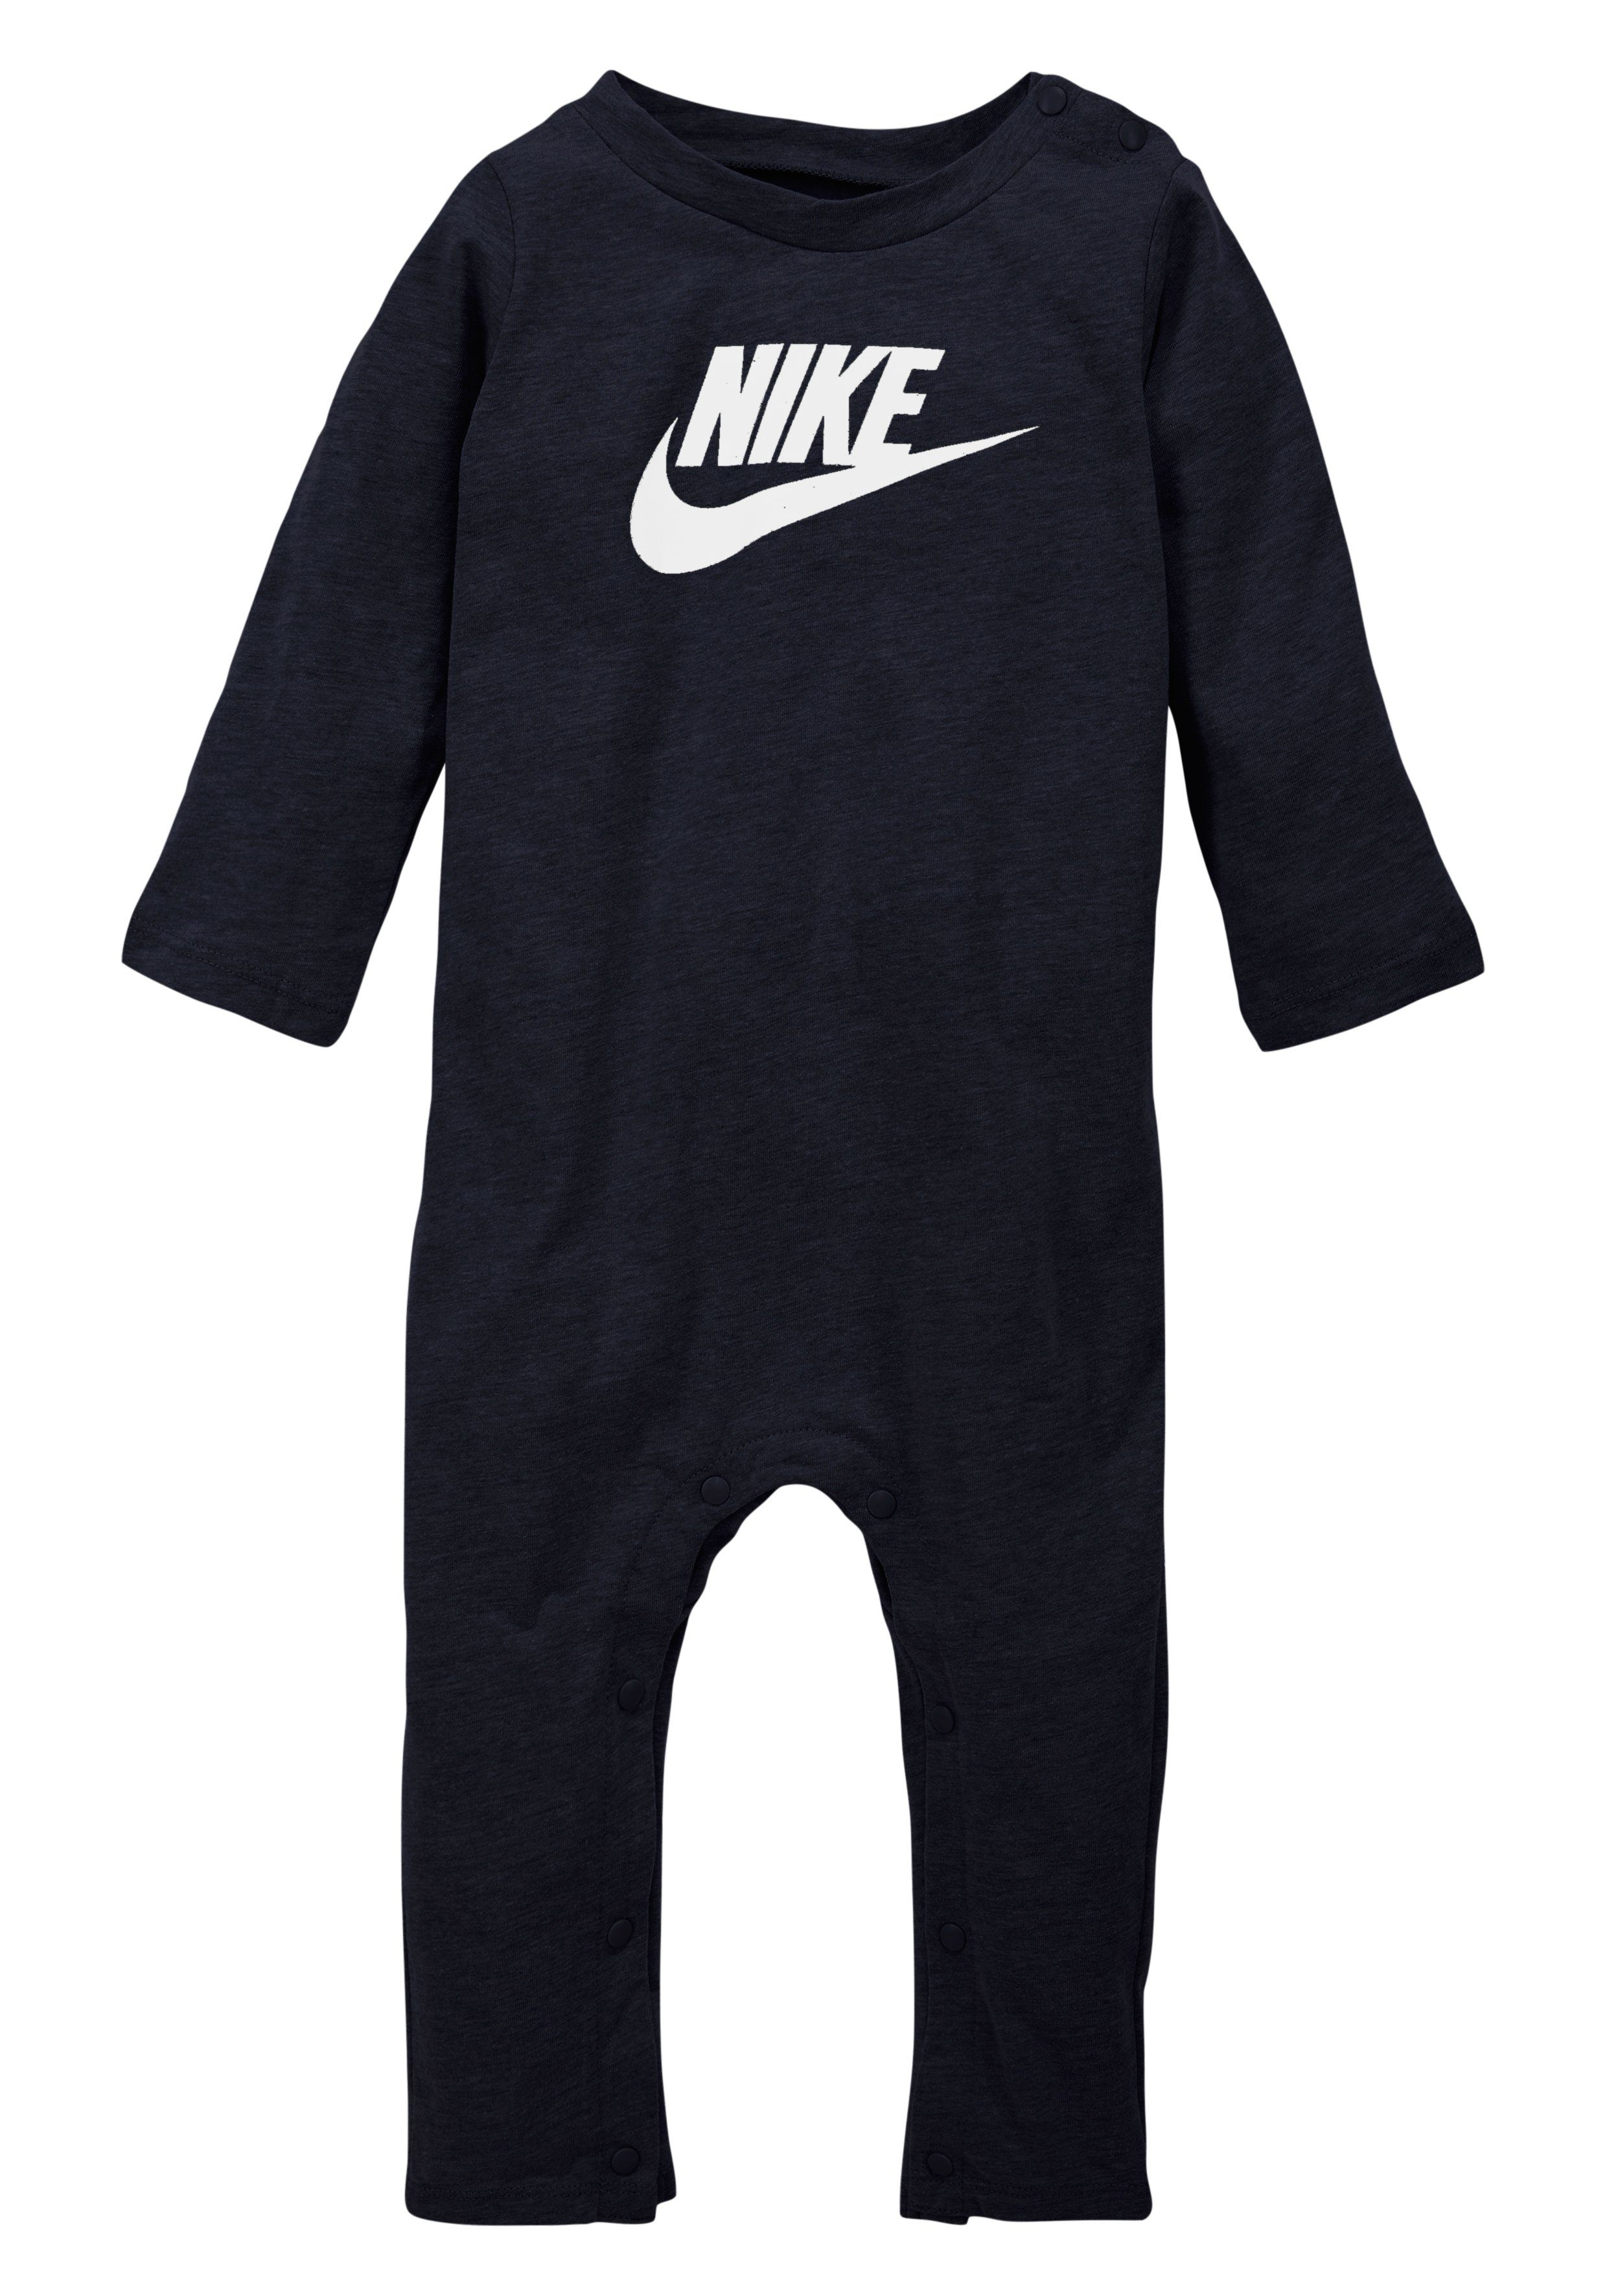 NON-FOOTED Sportswear HBR Strampler COVERALL Nike obsidian